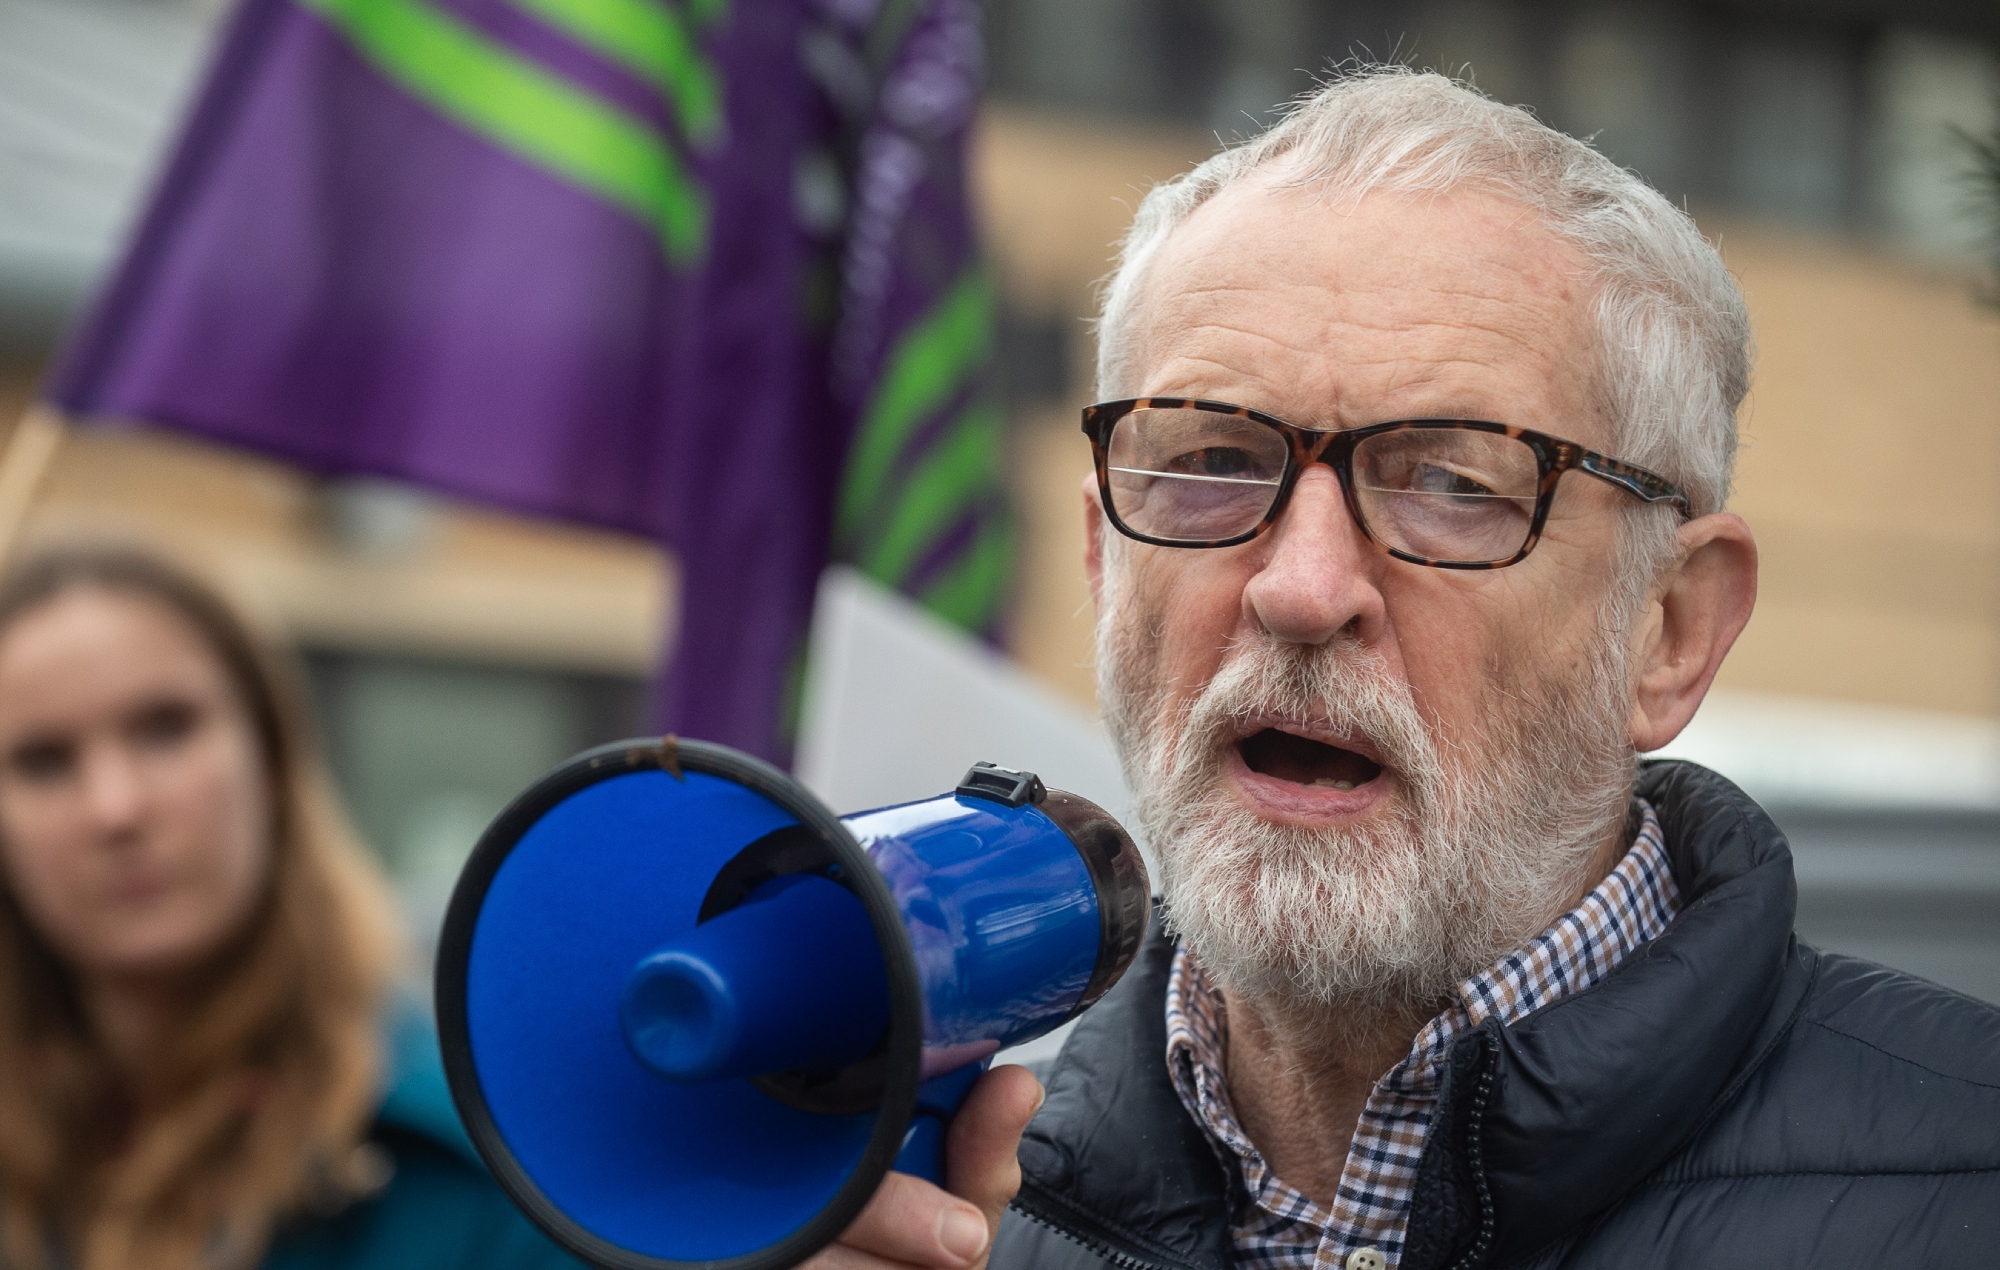 Jeremy Corbyn announced as MC for anti-racism protest rave at Downing Street